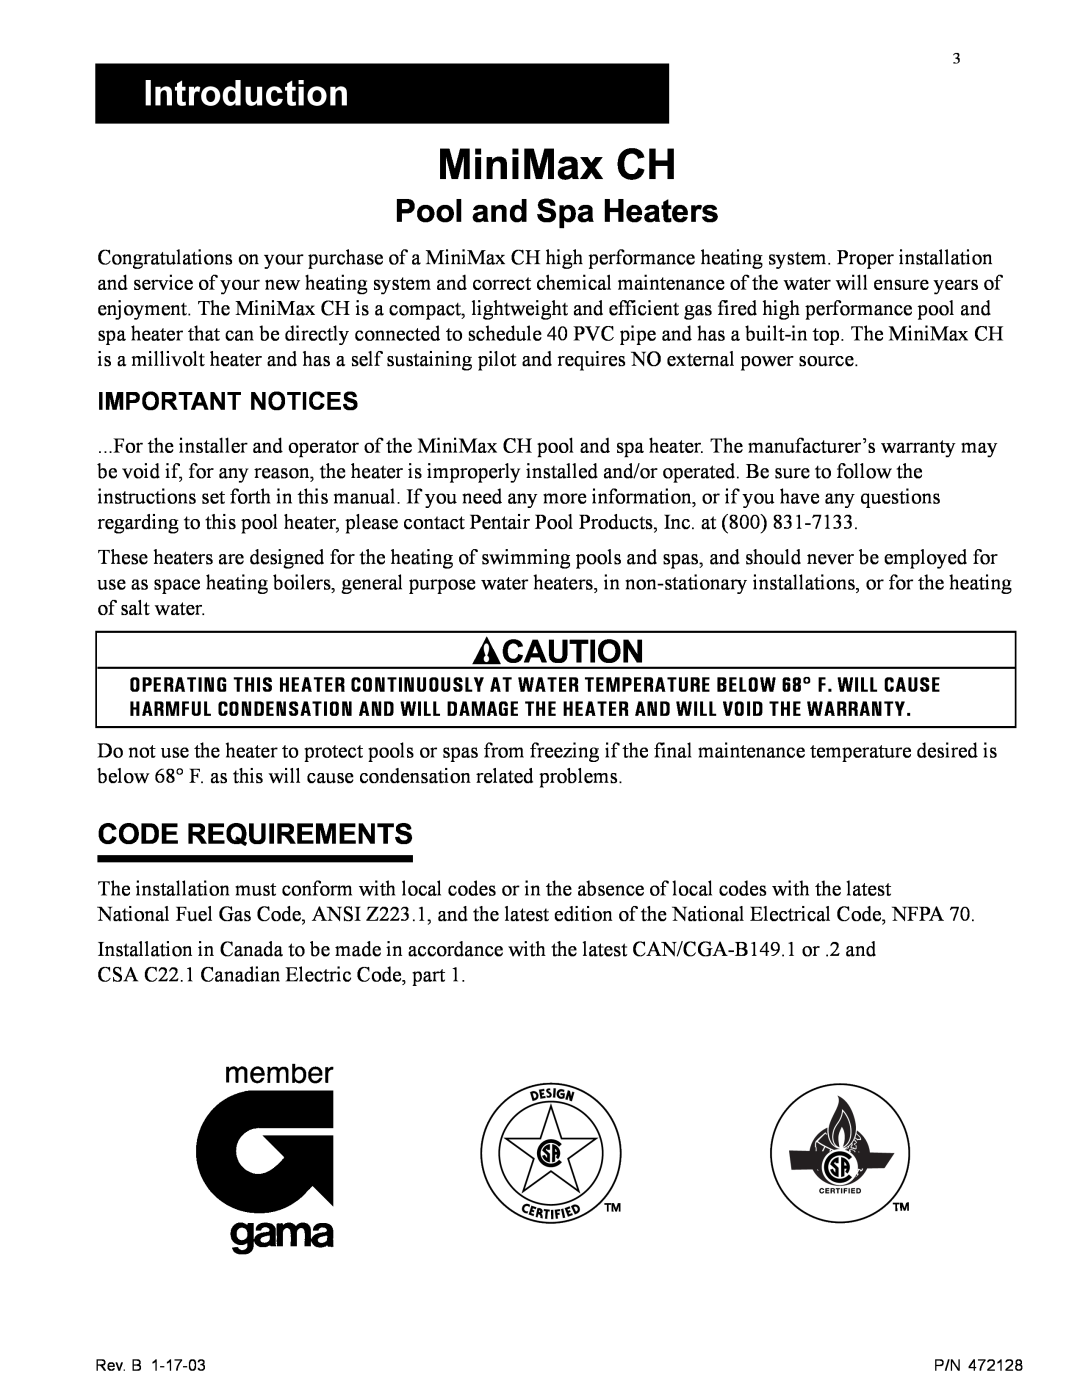 Pentair installation manual Introduction, Pool and Spa Heaters, Code Requirements, Important Notices, MiniMax CH 